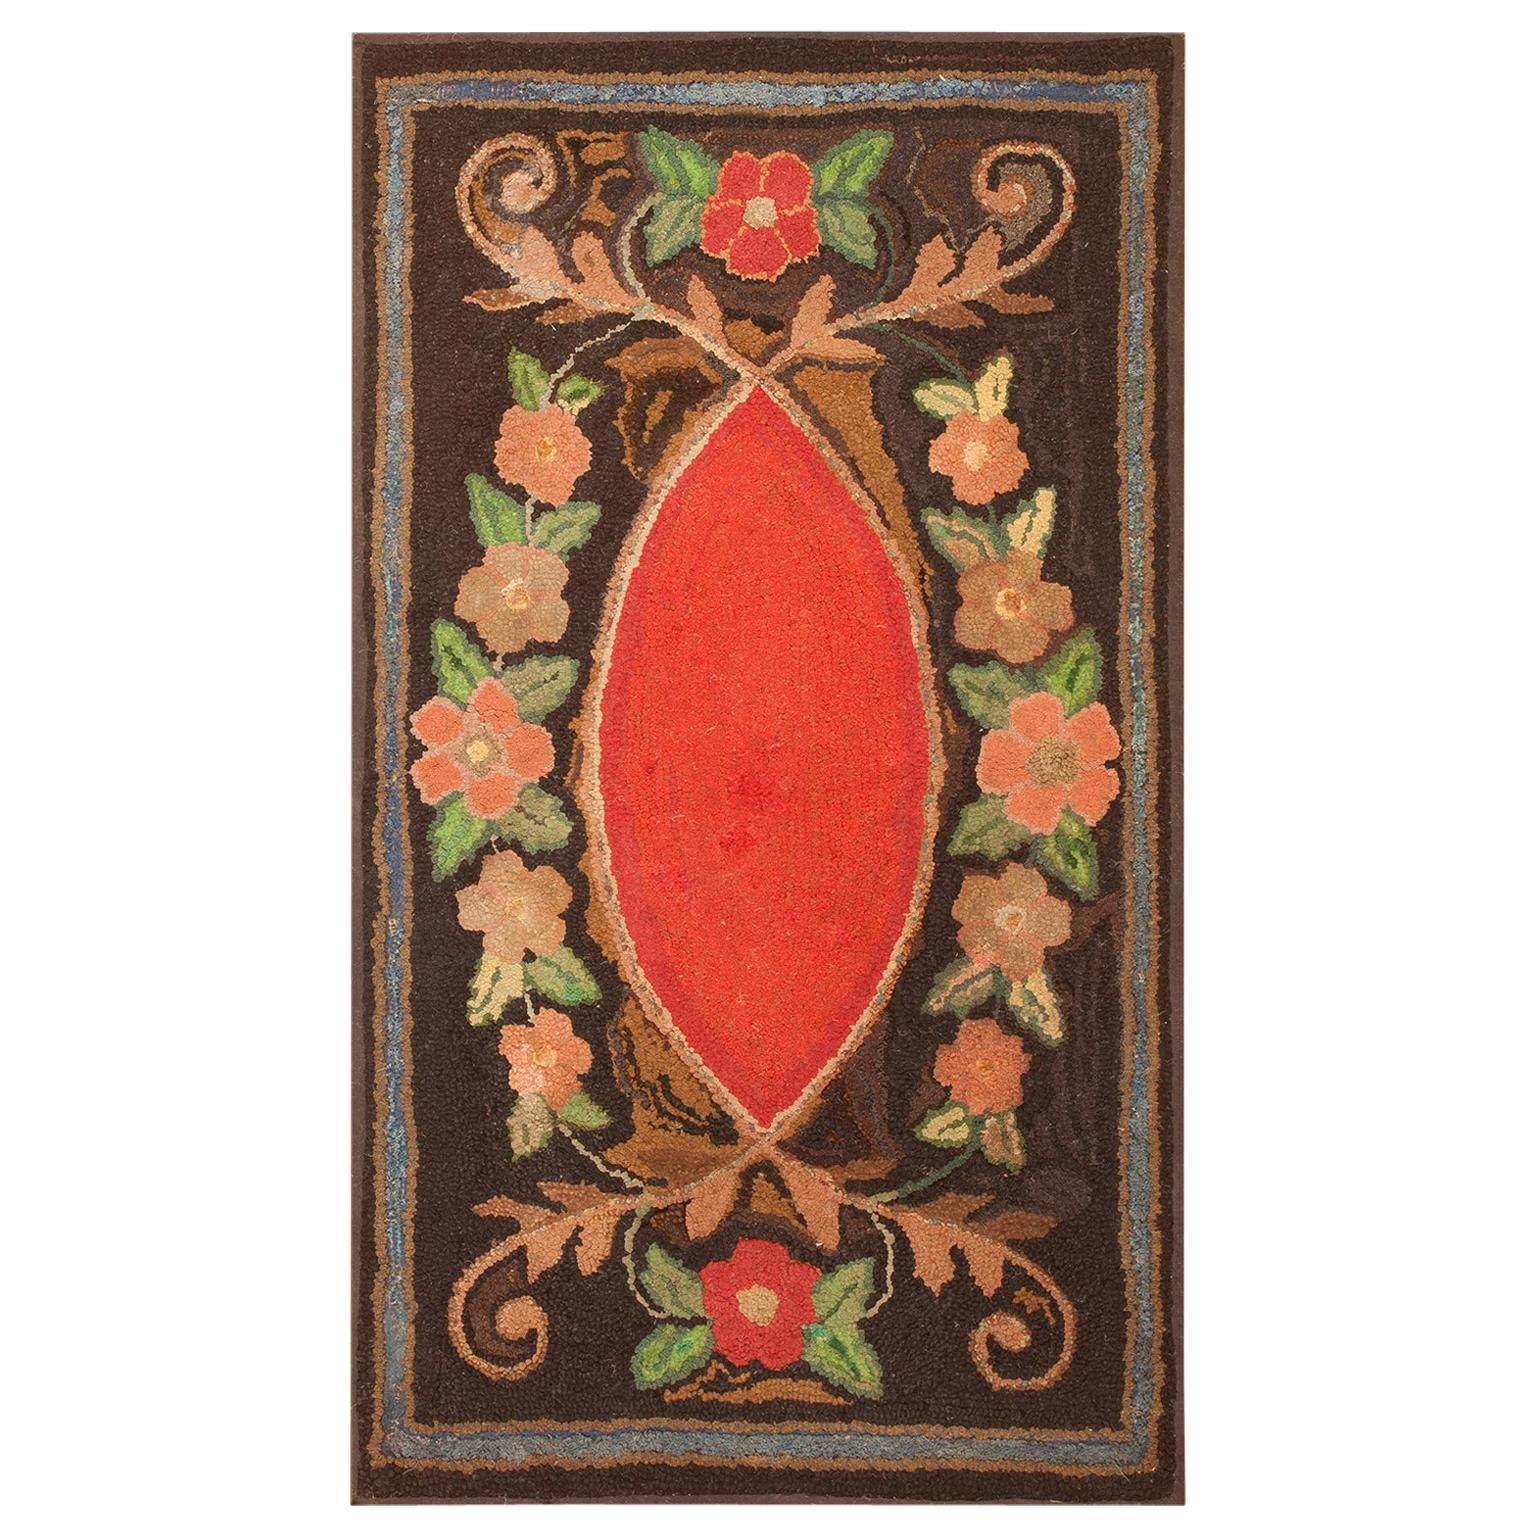 Late 19th Century American Hooked Rug ( 2'2" x 4' - 66 x 122 )  For Sale